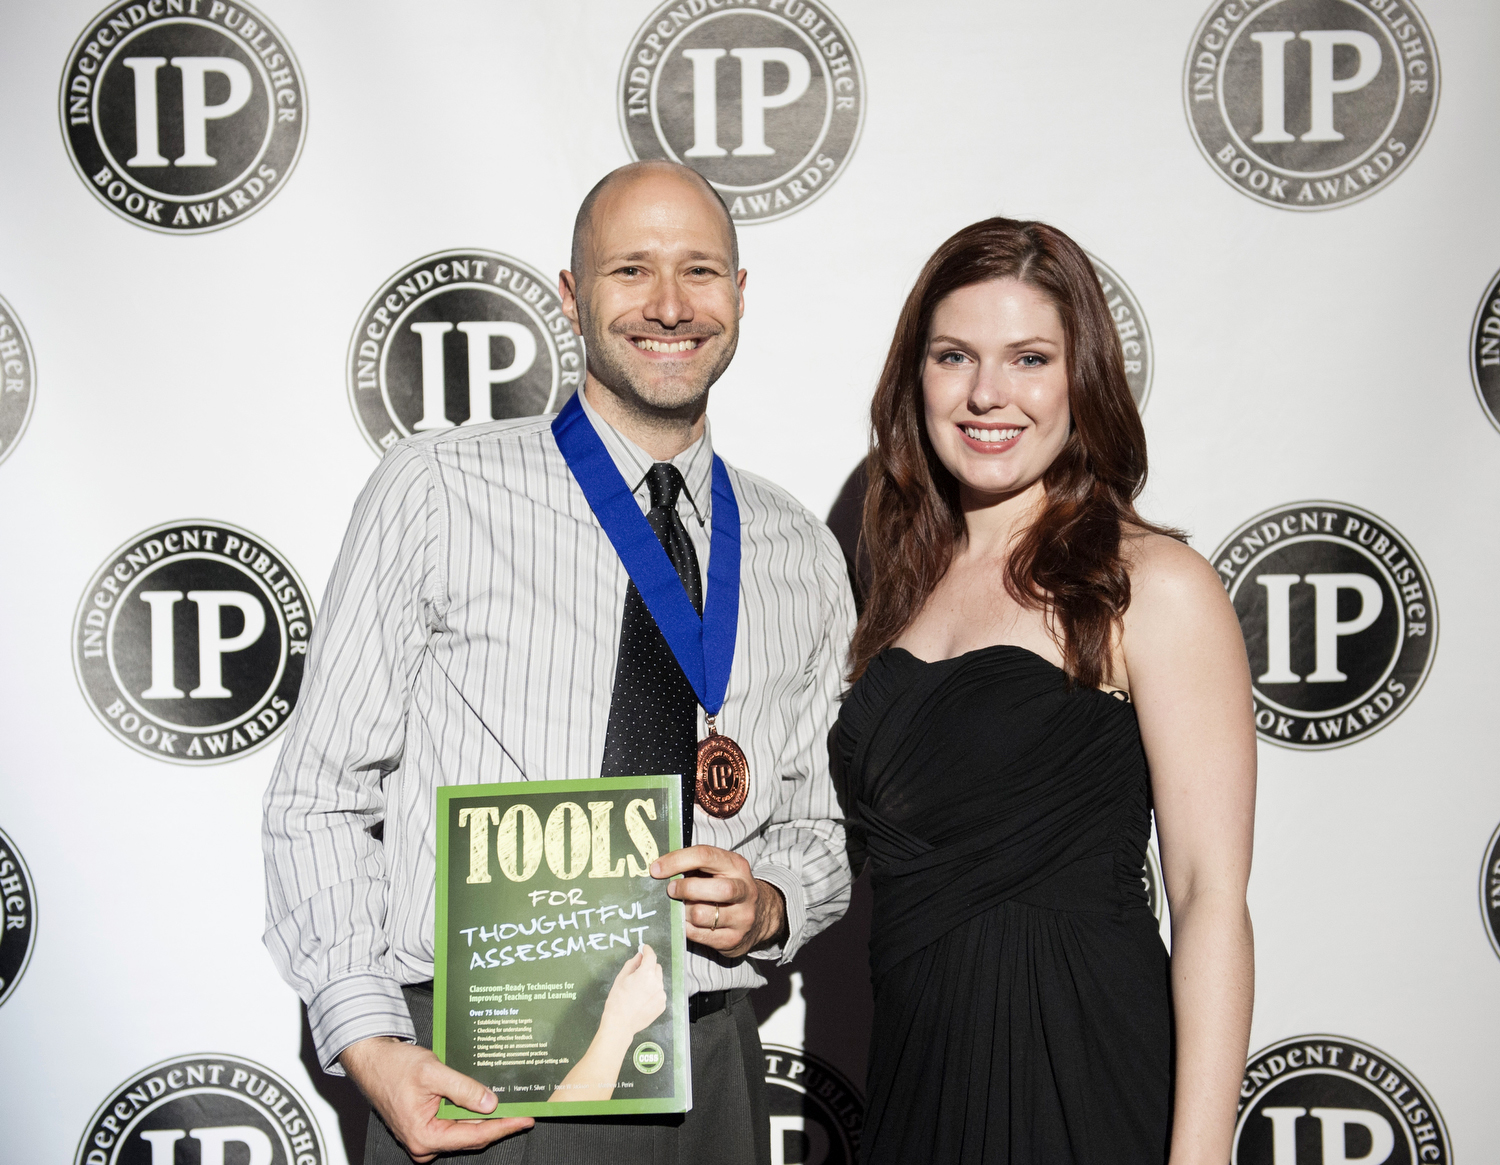 Co-author of Tools for Thoughtful Assessment Matthew Perini accepting the Bronze Award in the Education 1 category at the 17th Annual IPPY Awards, New York, NY, May 2013.